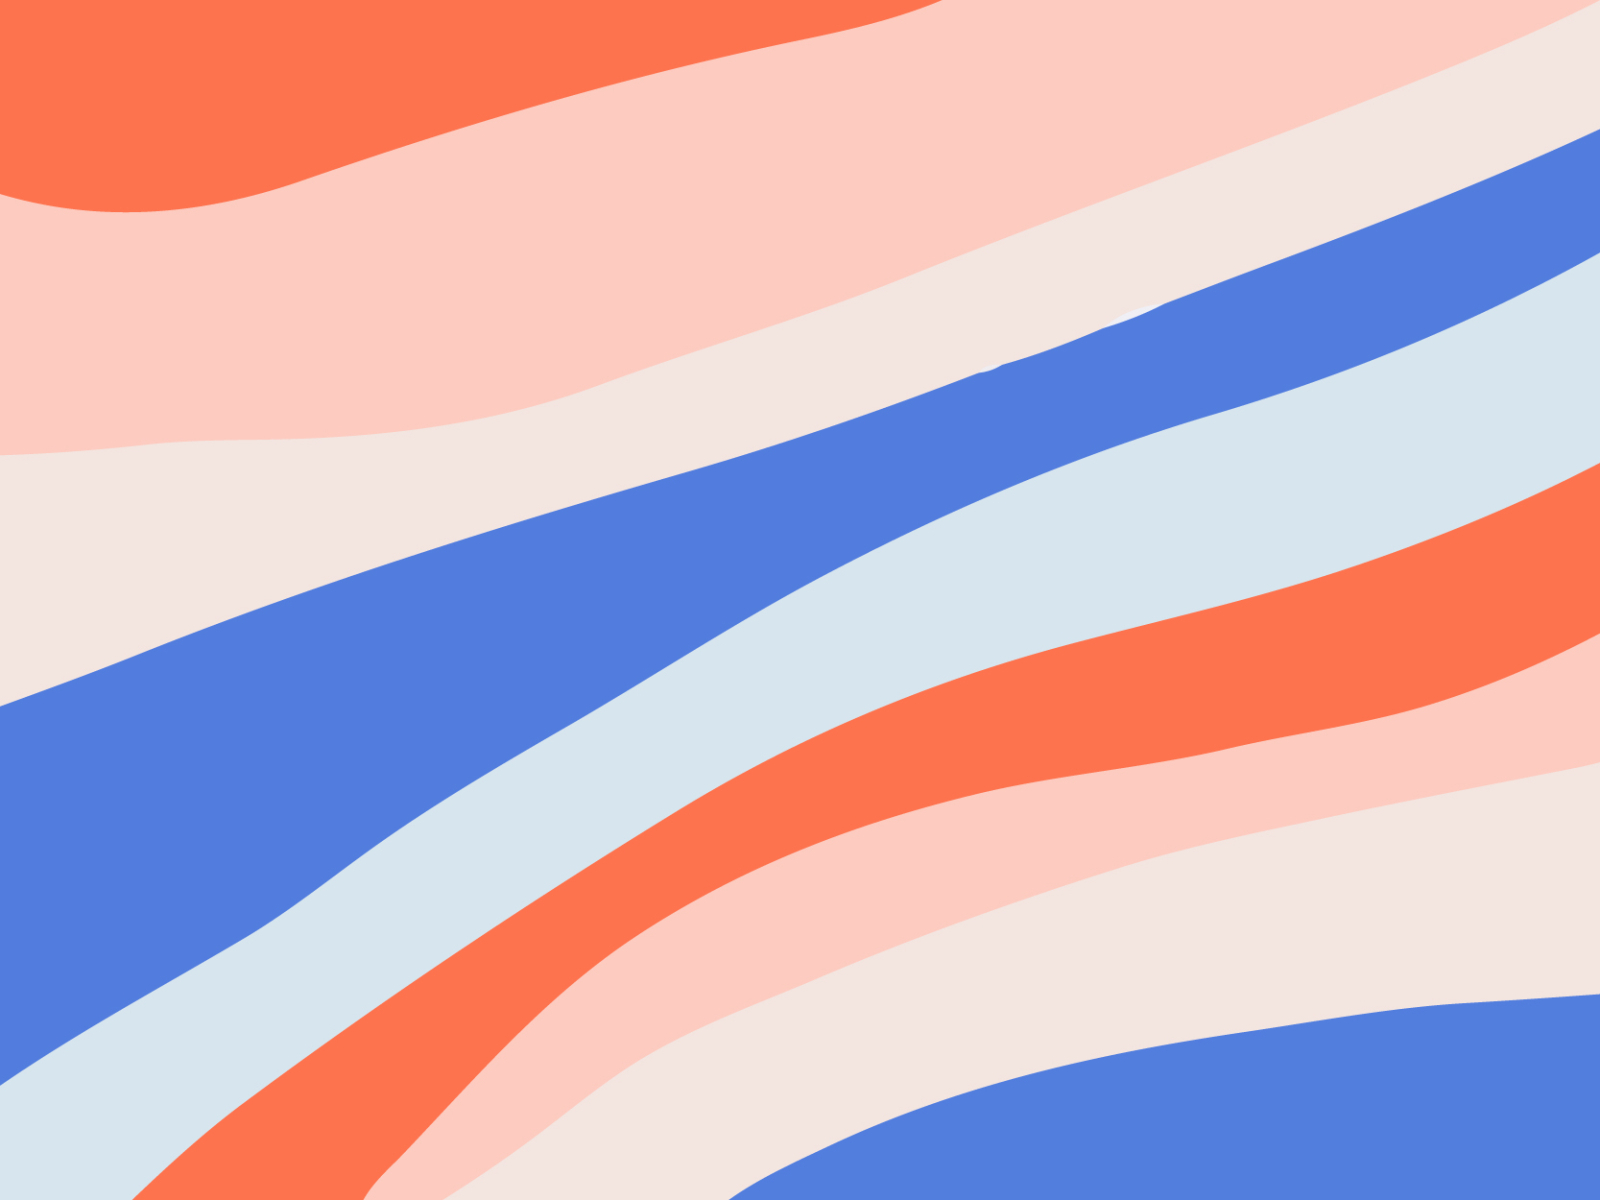 Wave Lines by Lauren on Dribbble